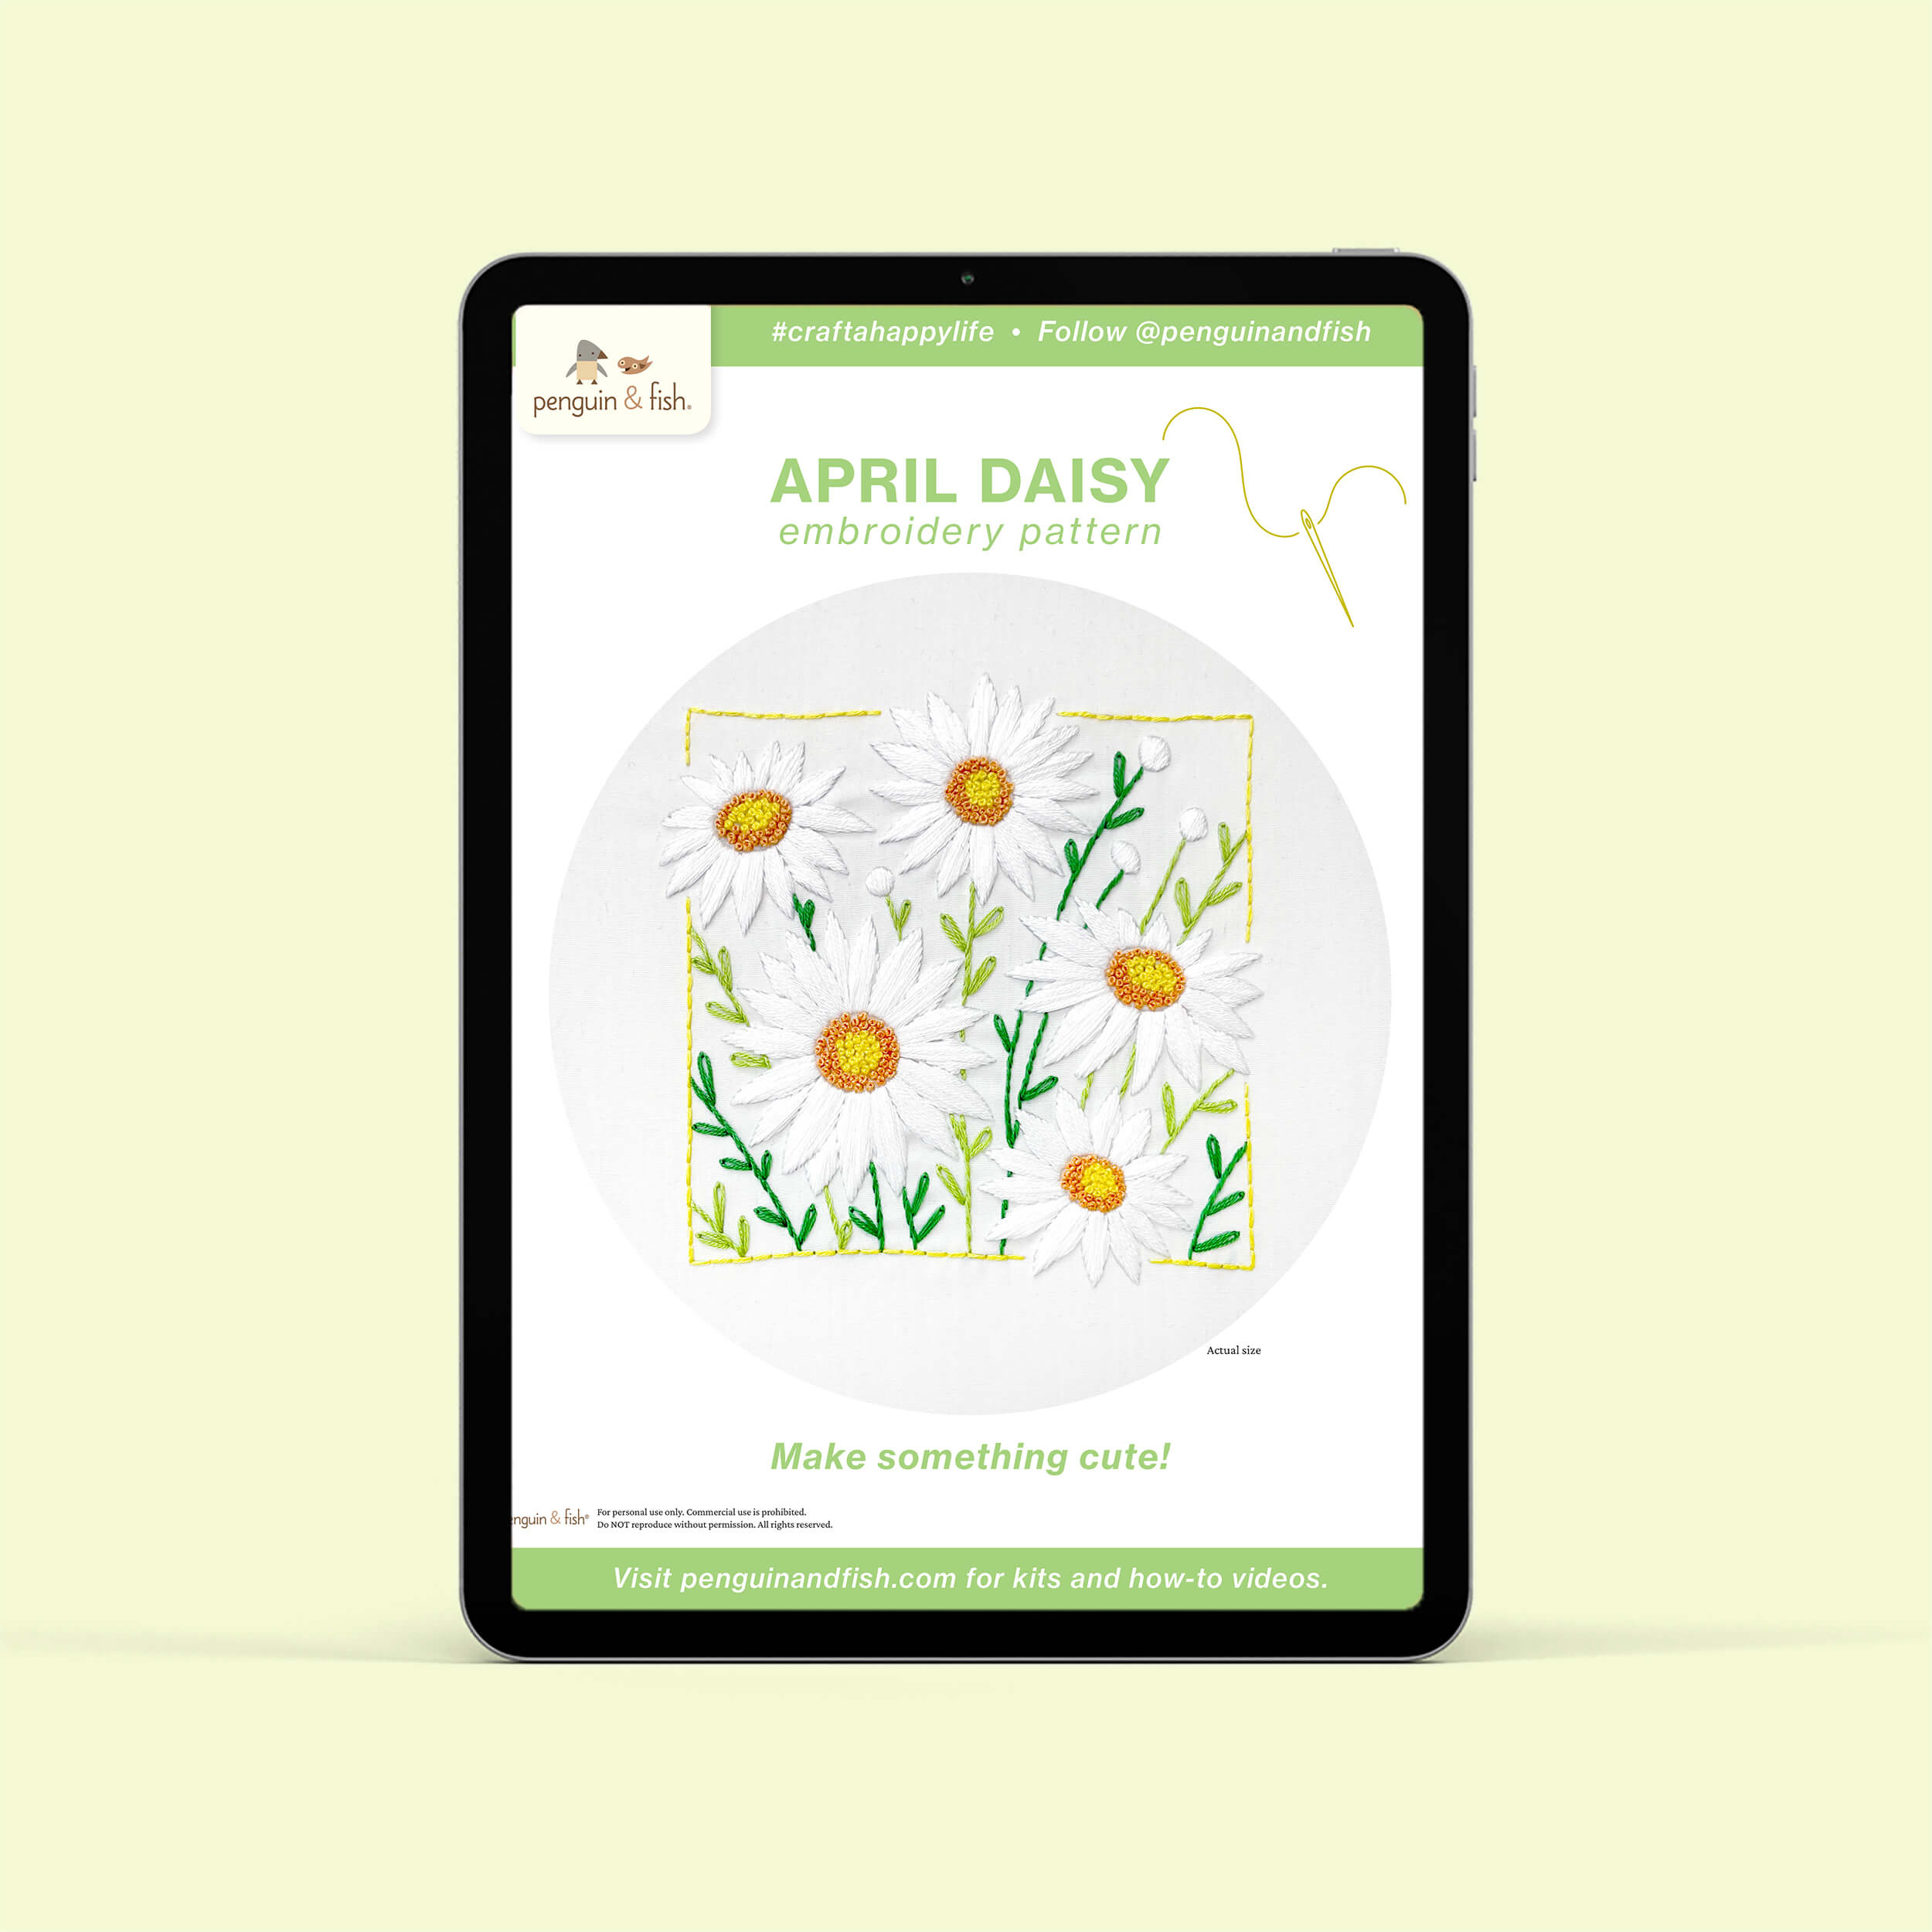 April Daisy PDF embroidery pattern shown on a tablet